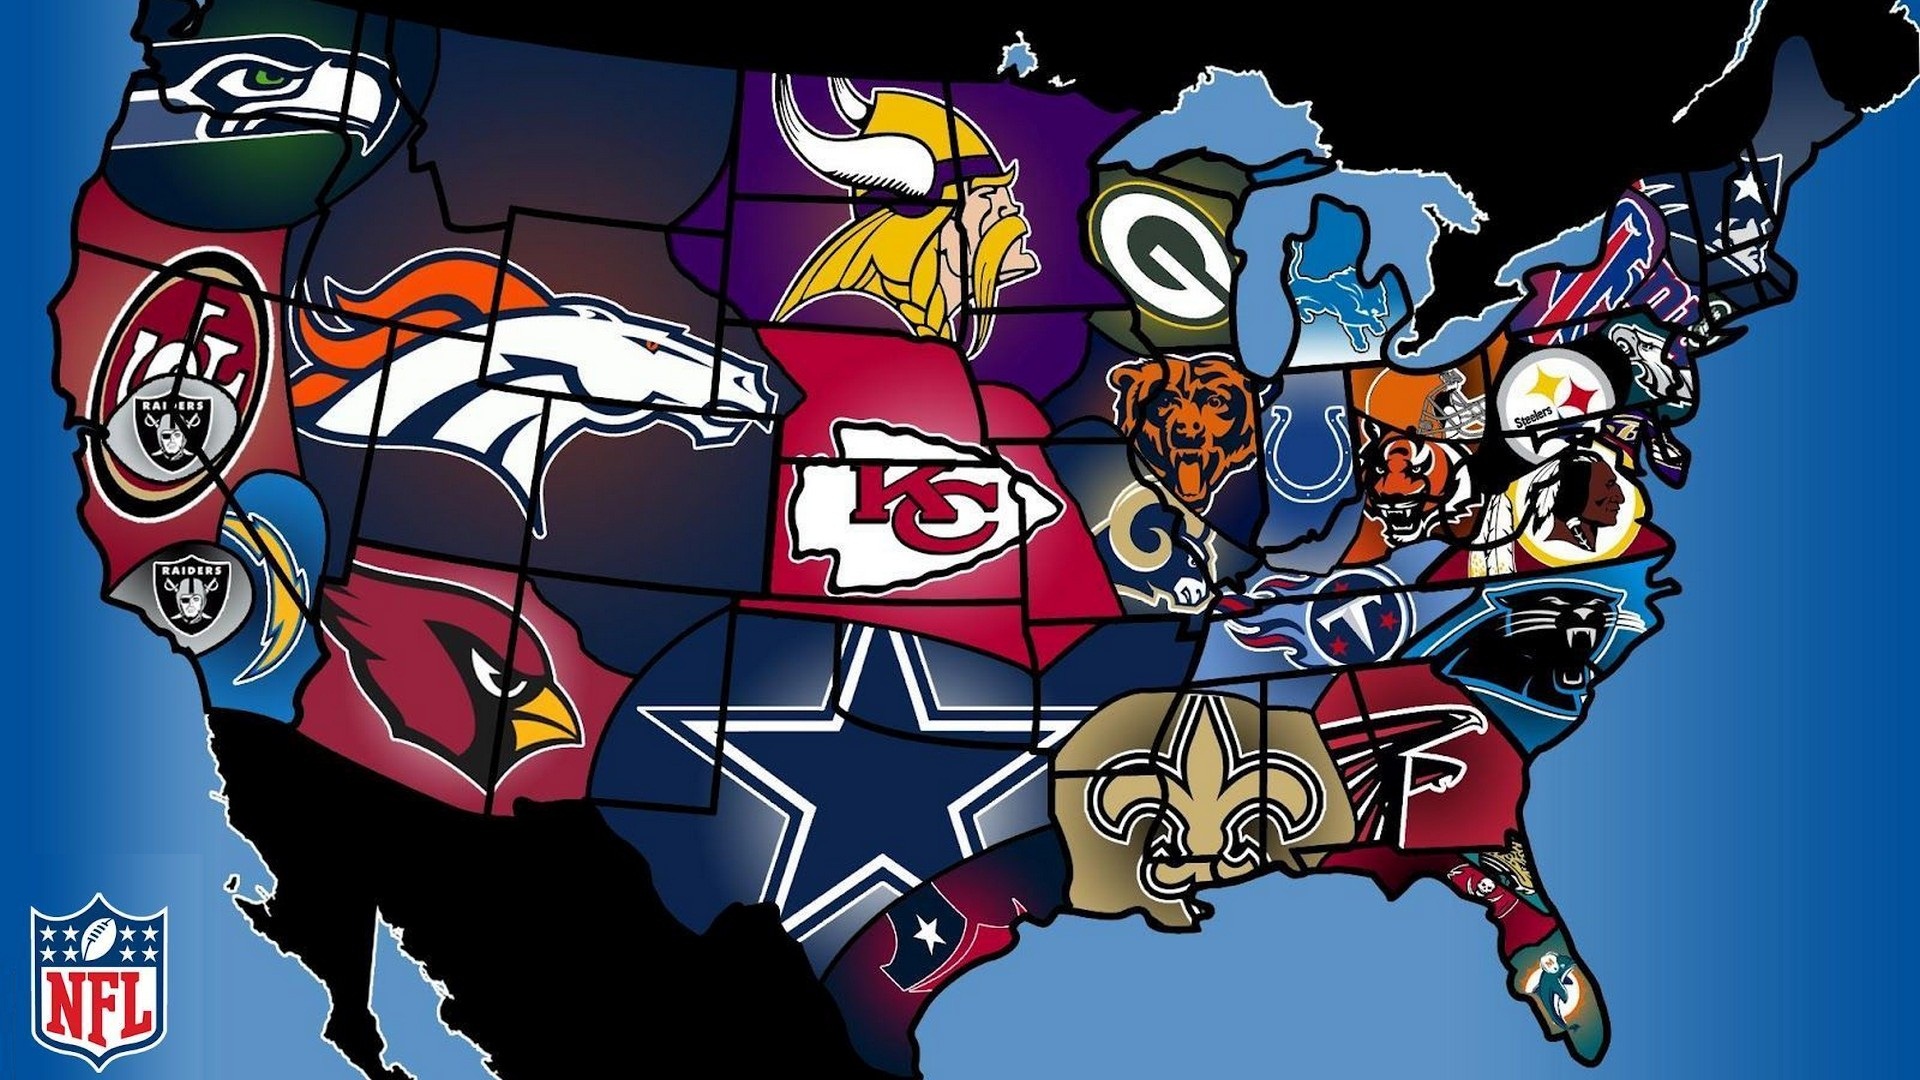 Cool NFL For PC Wallpaper With Resolution 1920X1080